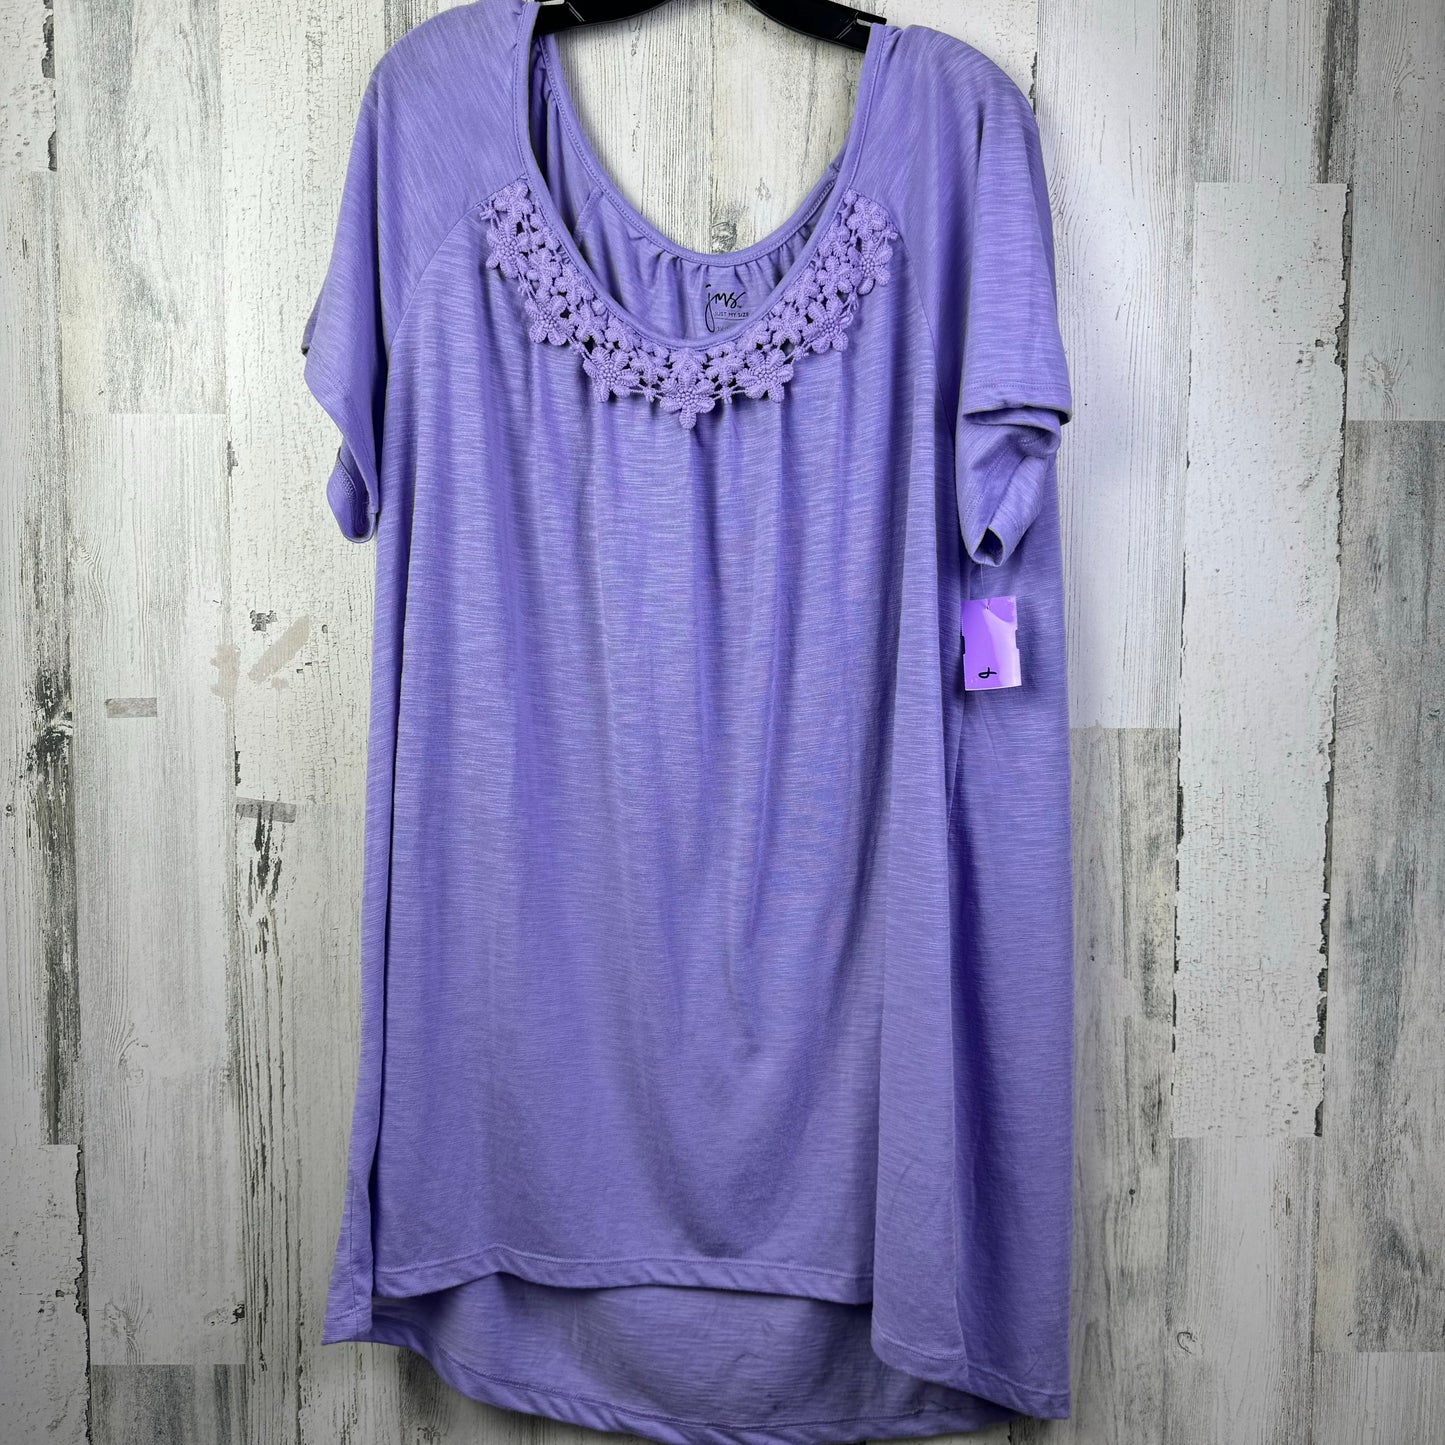 Purple Top Short Sleeve Basic Just My Size, Size 3x